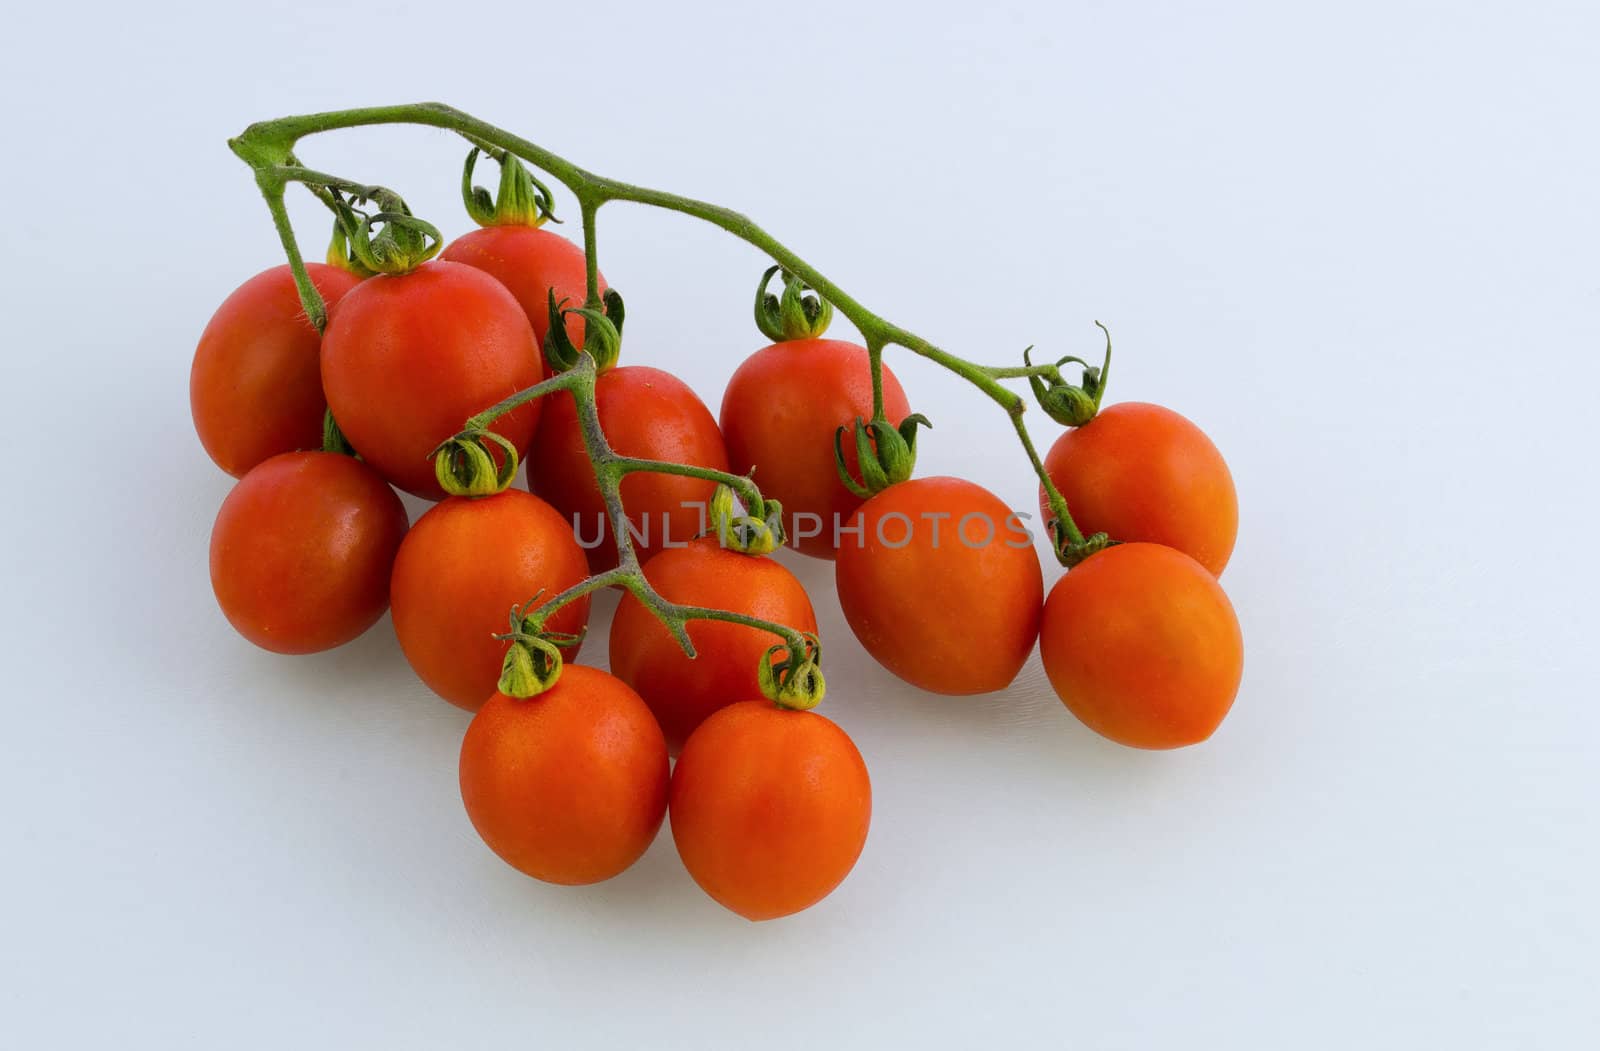 Sugardrop tomatoes by Jez22